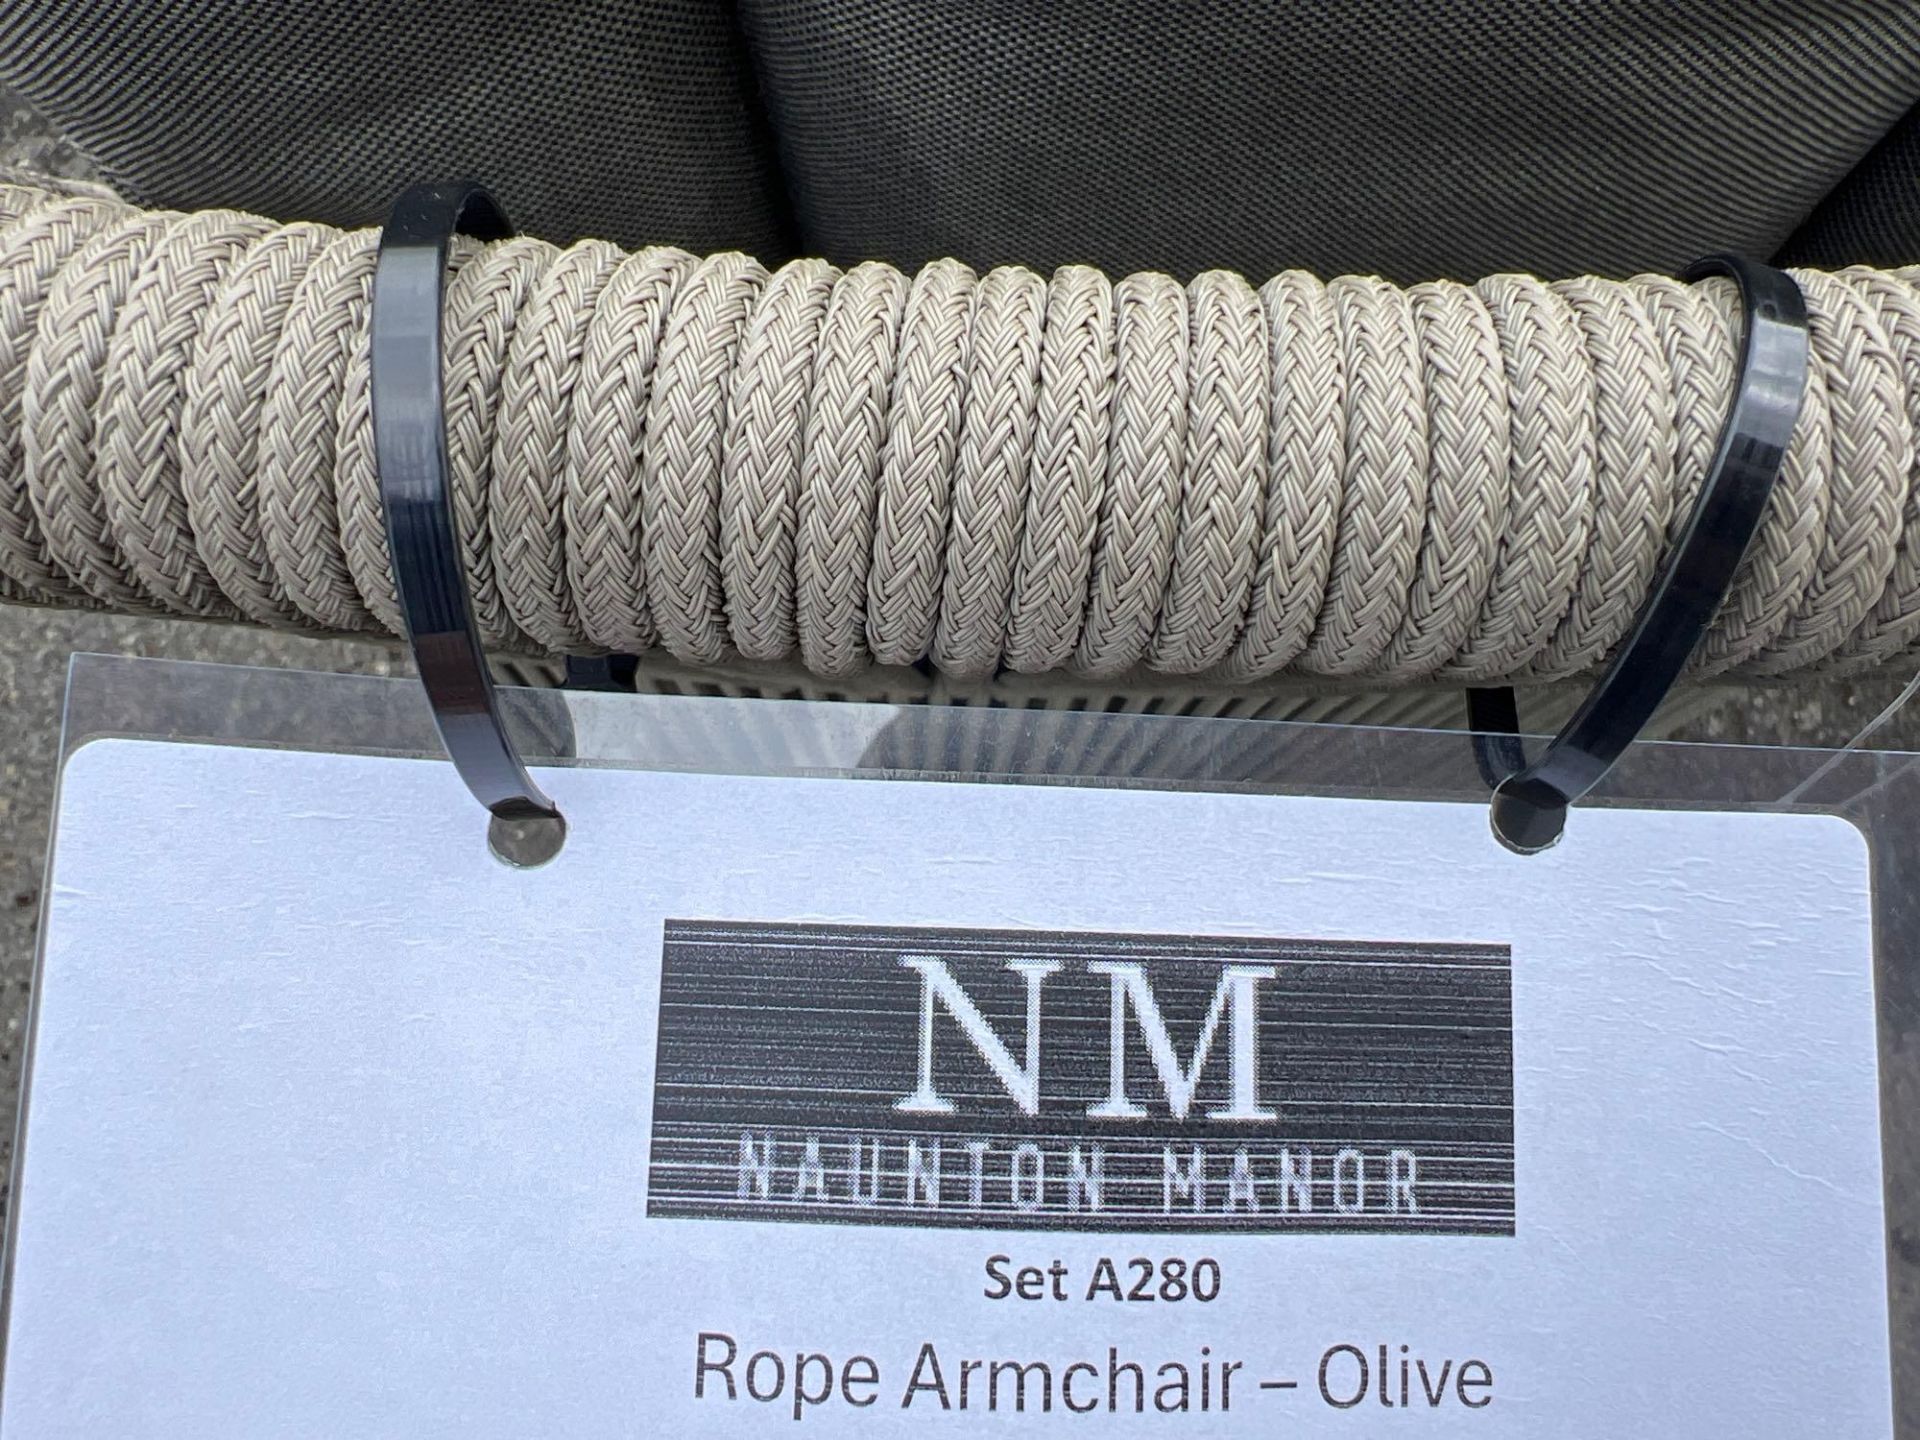 A280 Rope Armchair Olive - Image 3 of 3